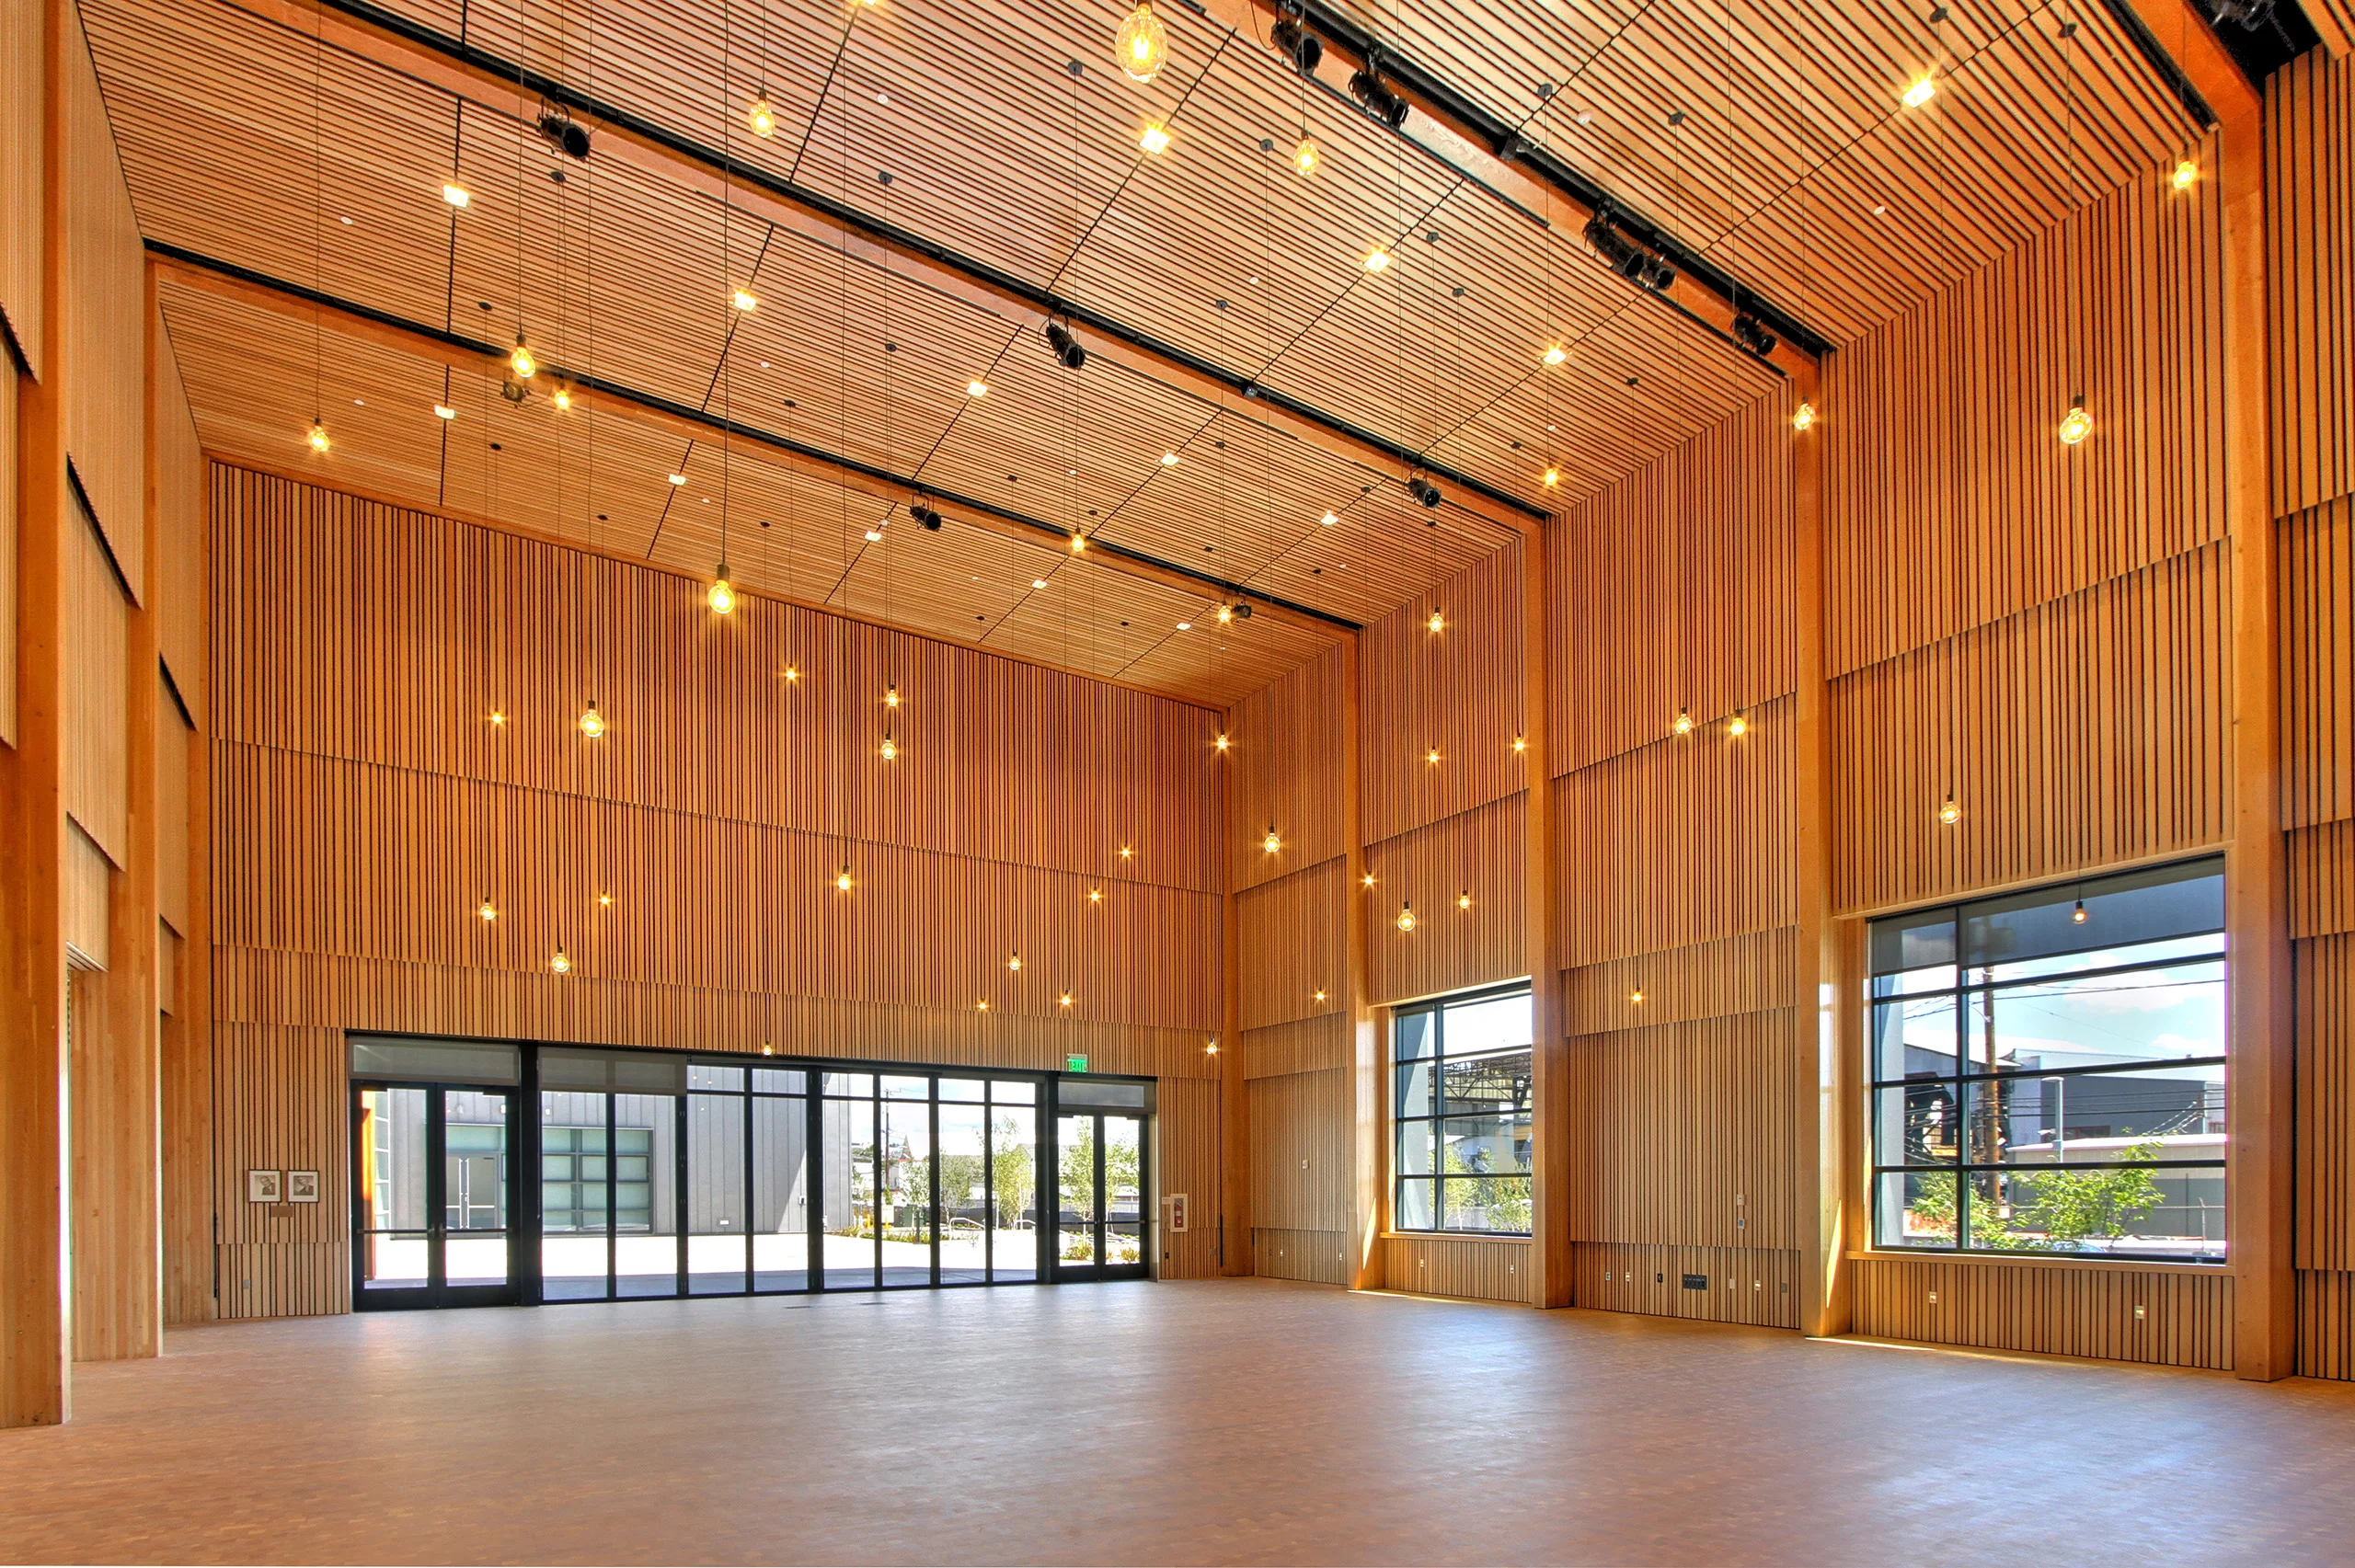 Interior view of the National Nordic Museum's auditorium with hanging lights and finished wood walls and ceiling